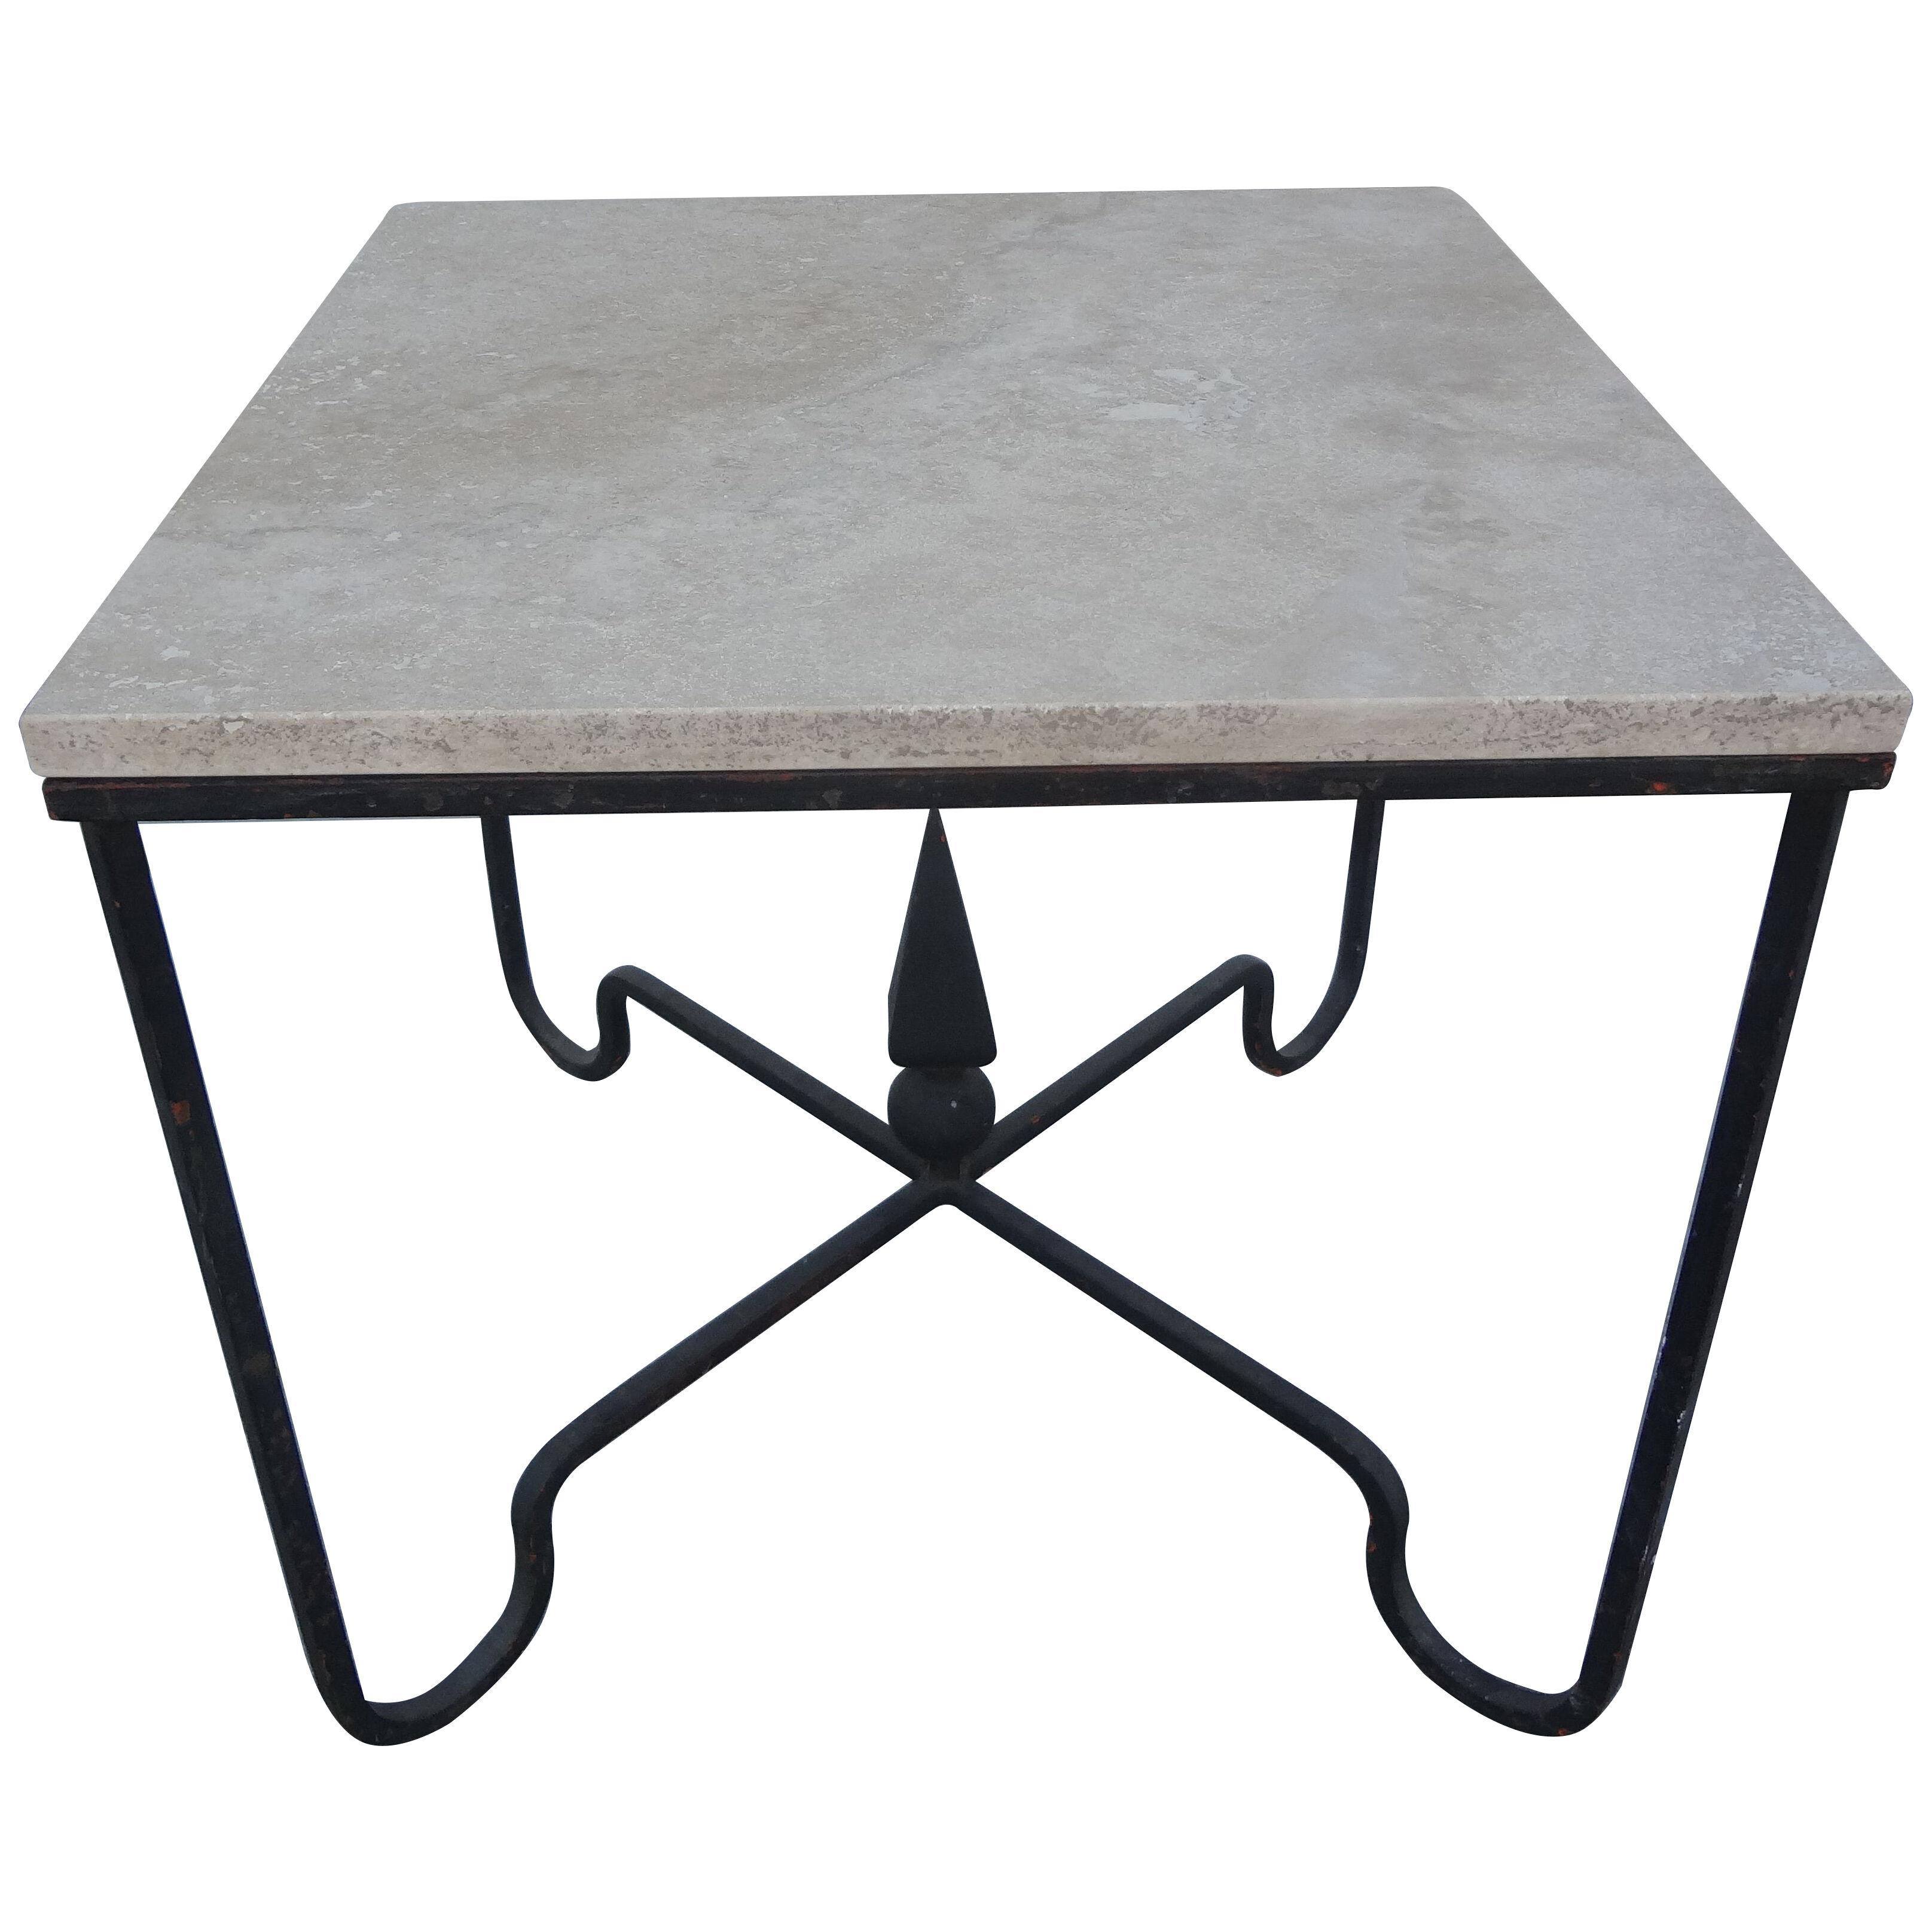 French Wrought Iron Table With Travertine Top